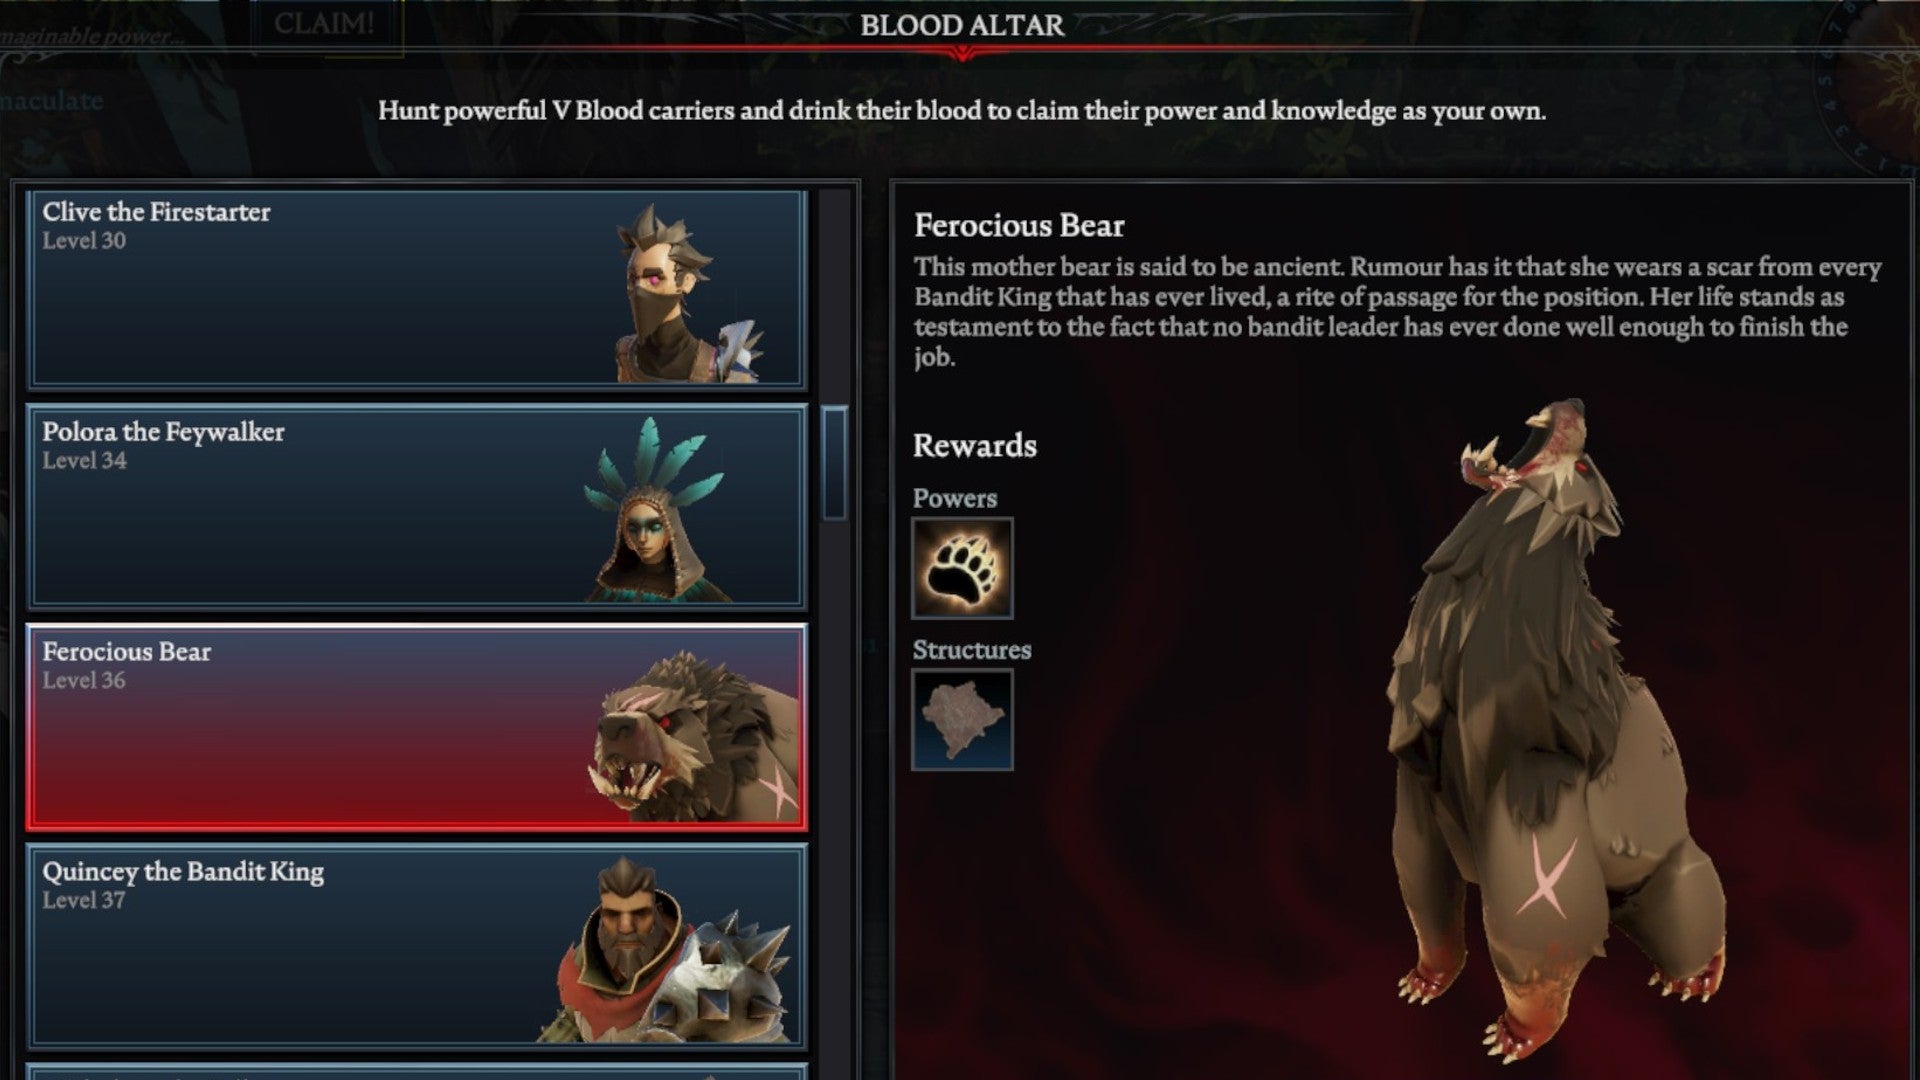 V Rising Ferocious Bear Blood Altar tracking page, showing an image of the roaring ferocious bear on the right and a list of bosses on the left